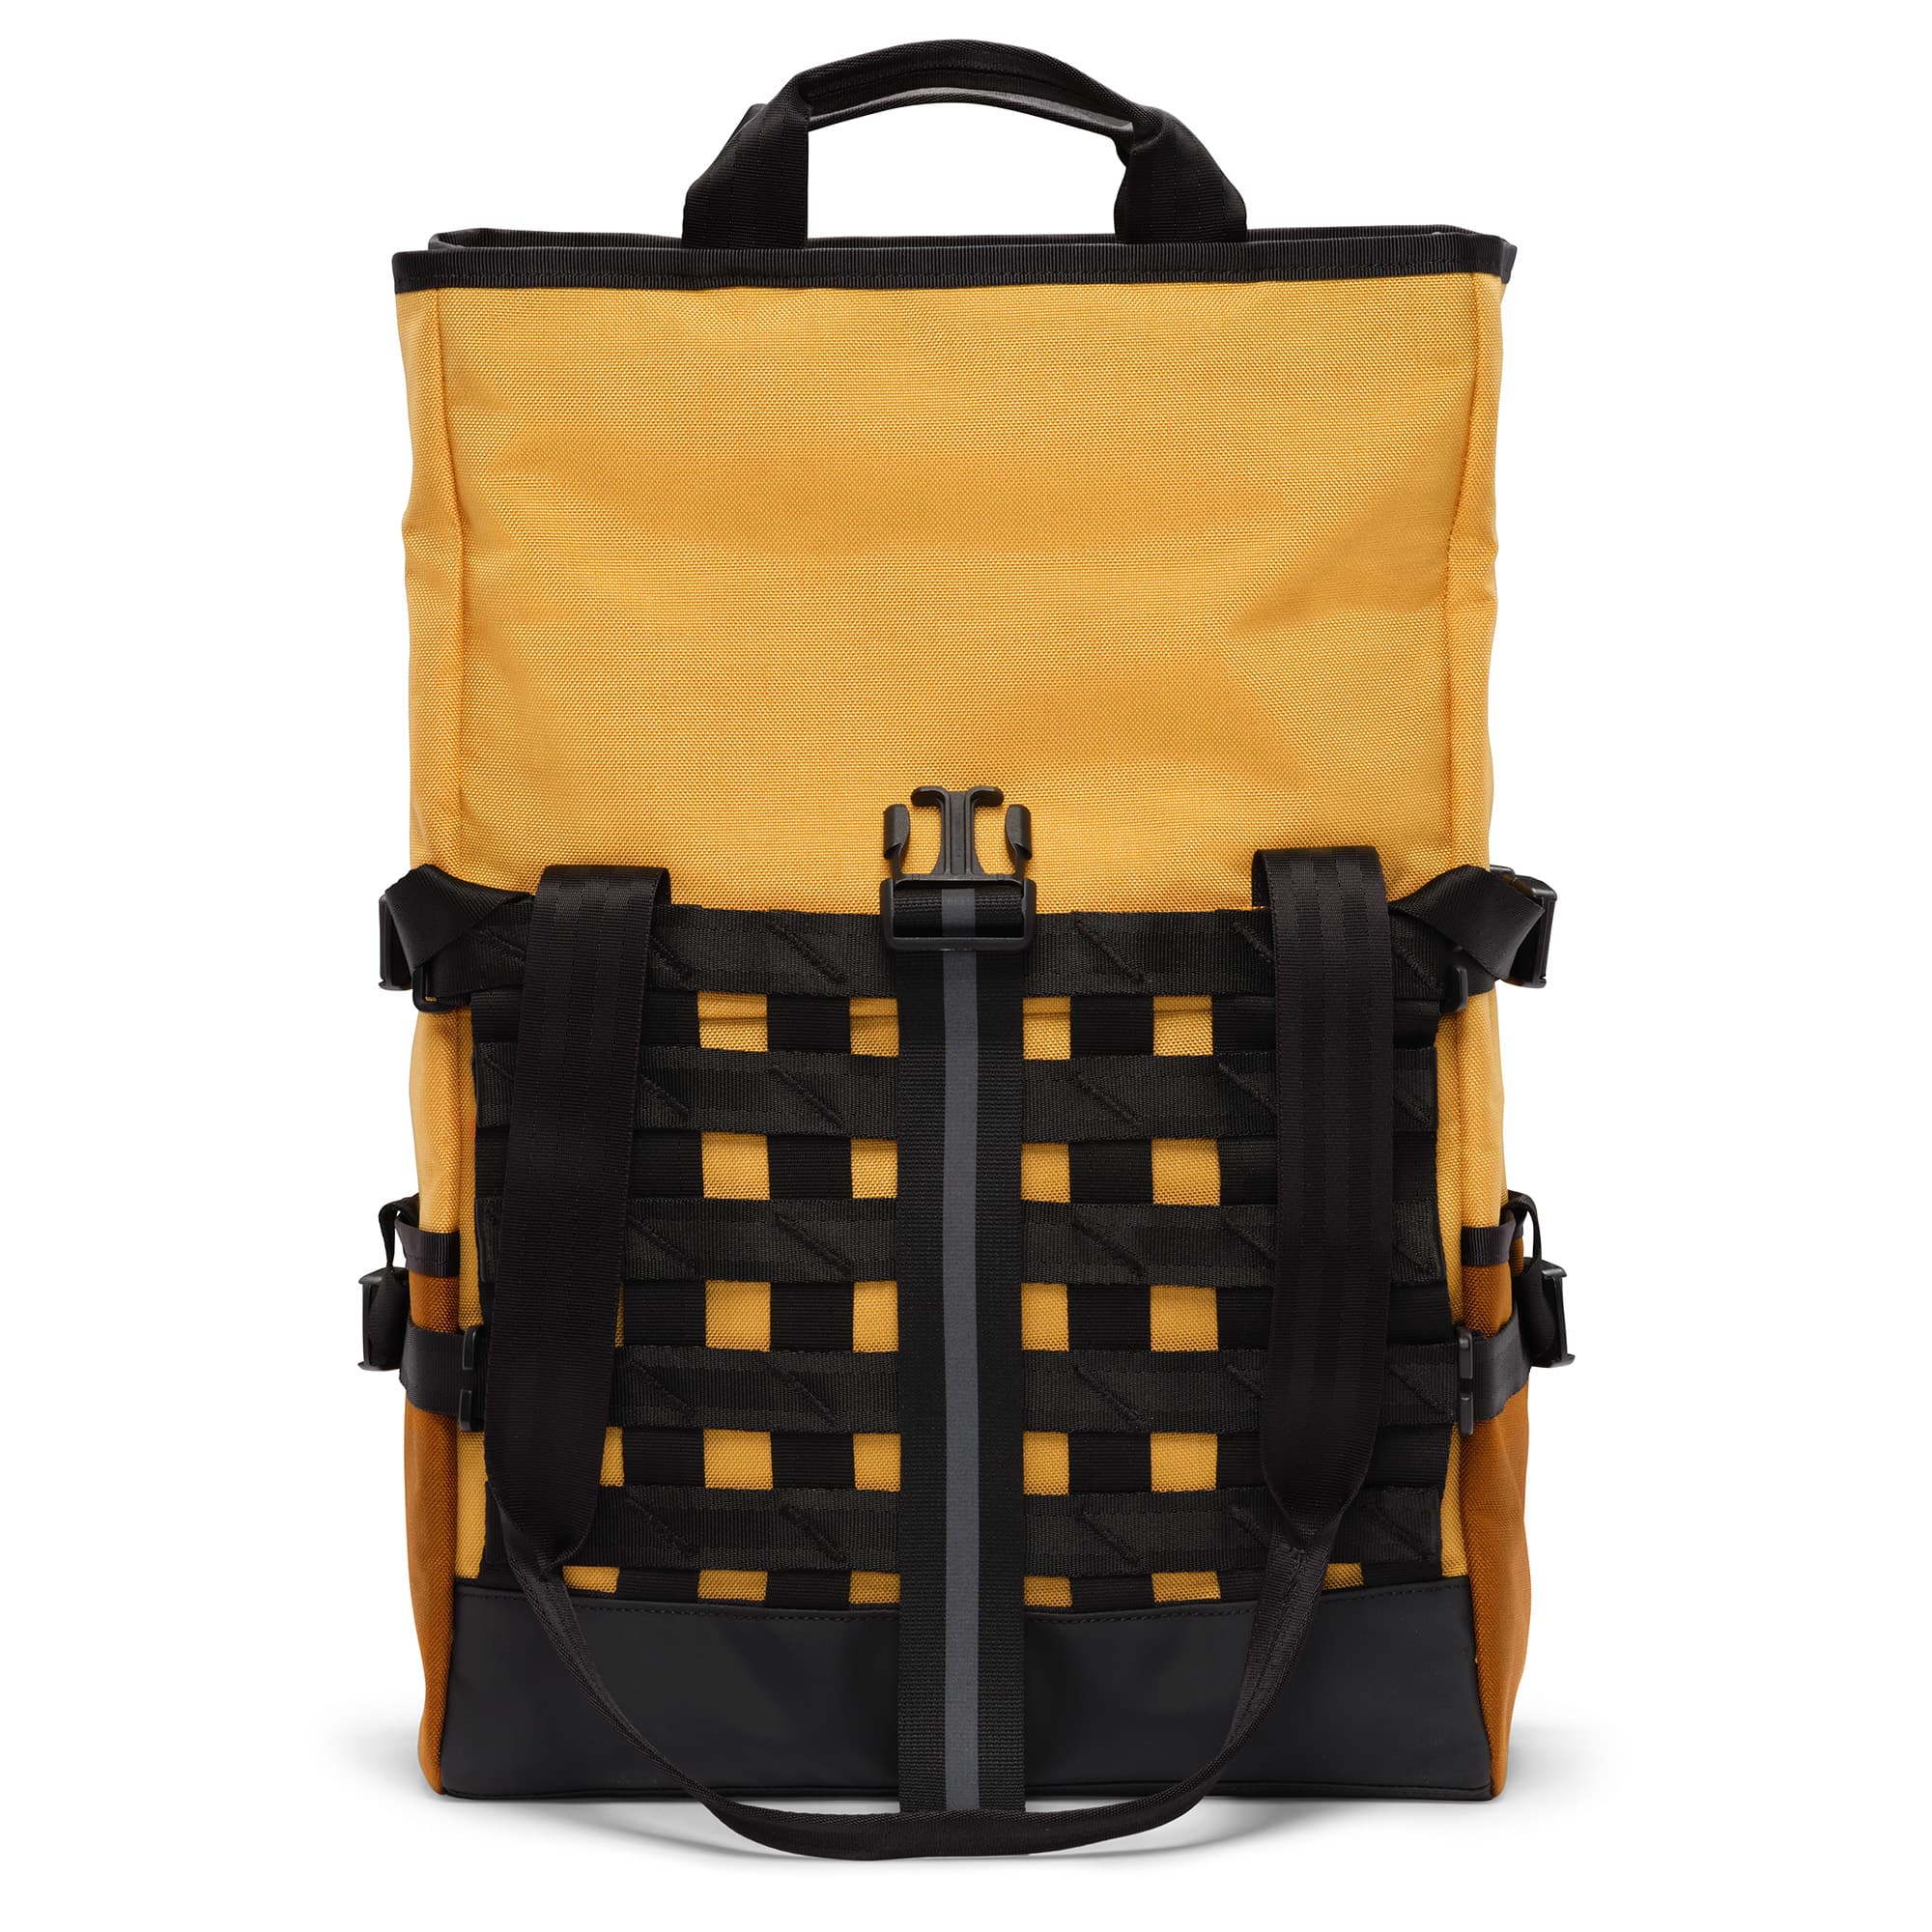 Weather resistant Barrage Tote in amber unrolled #color_amber tritone